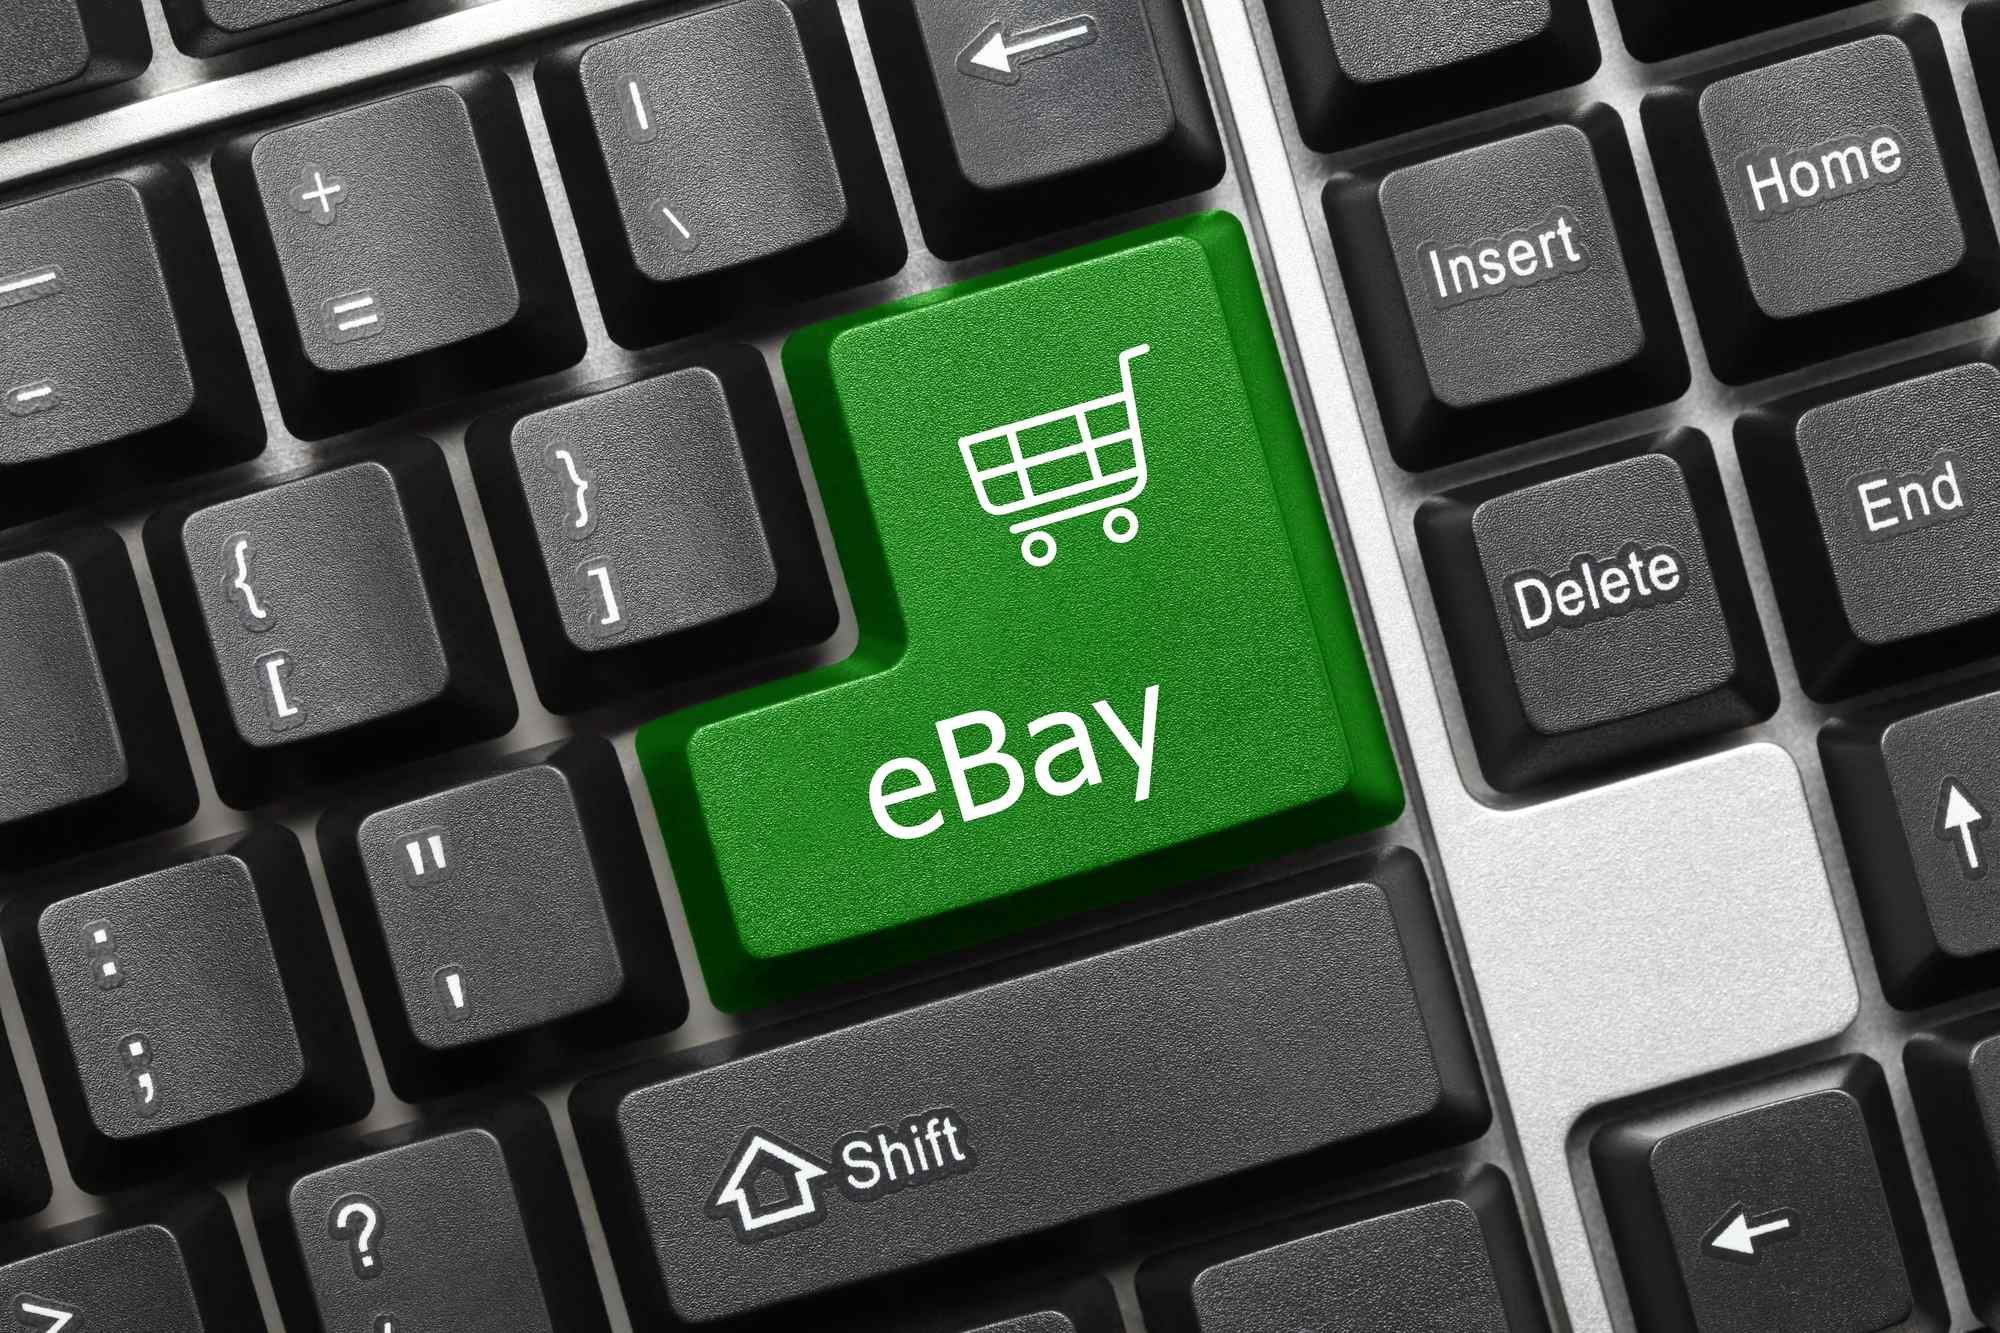 eBay has been accused of price gouging during COVID-19.